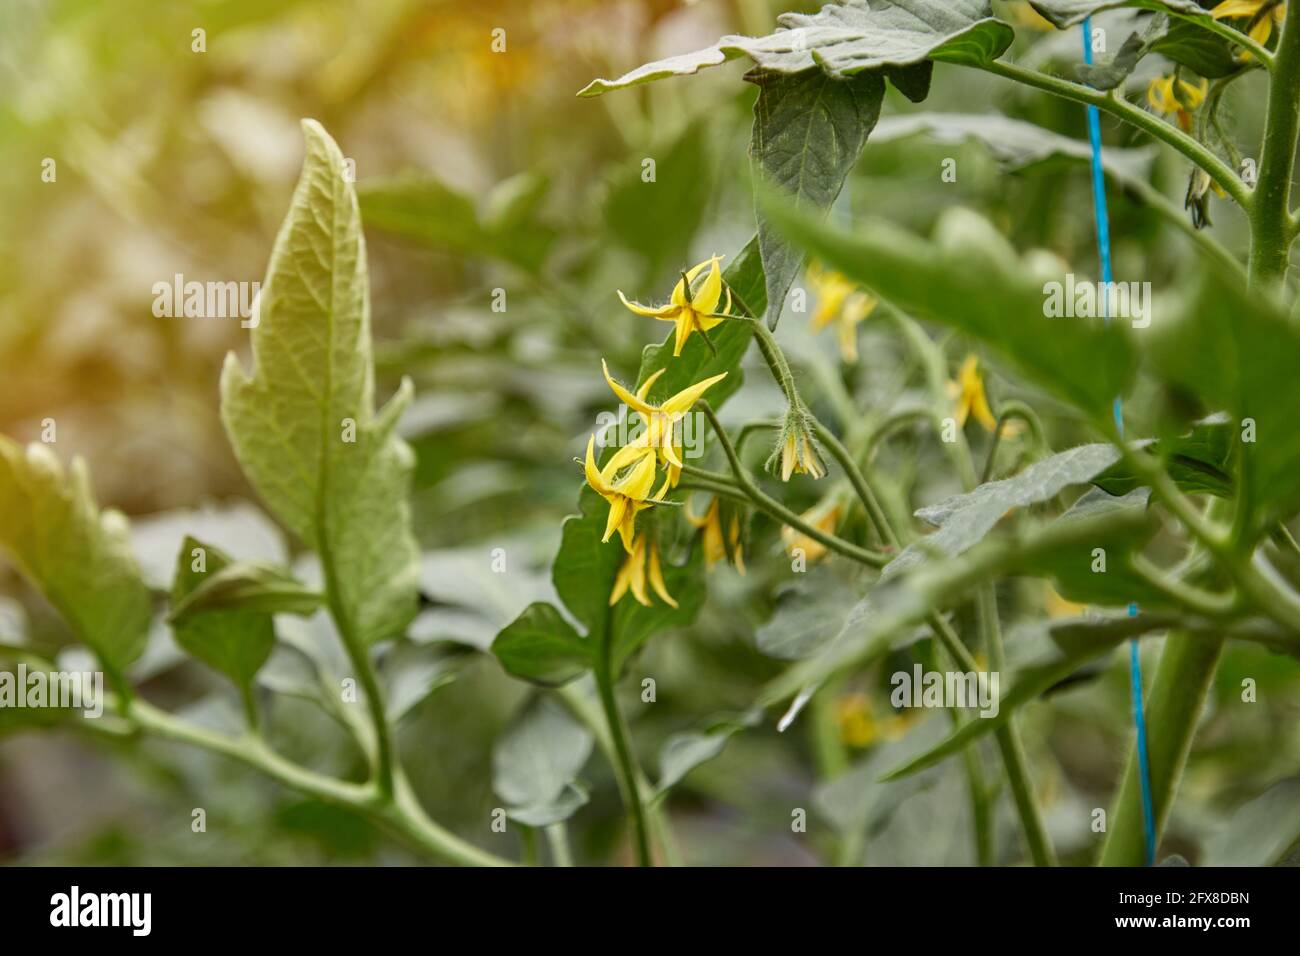 Spring greenhouse. Young tomato plant grown in a greenhouse. Spring home plants concept. Blooming tomatoes. Stock Photo